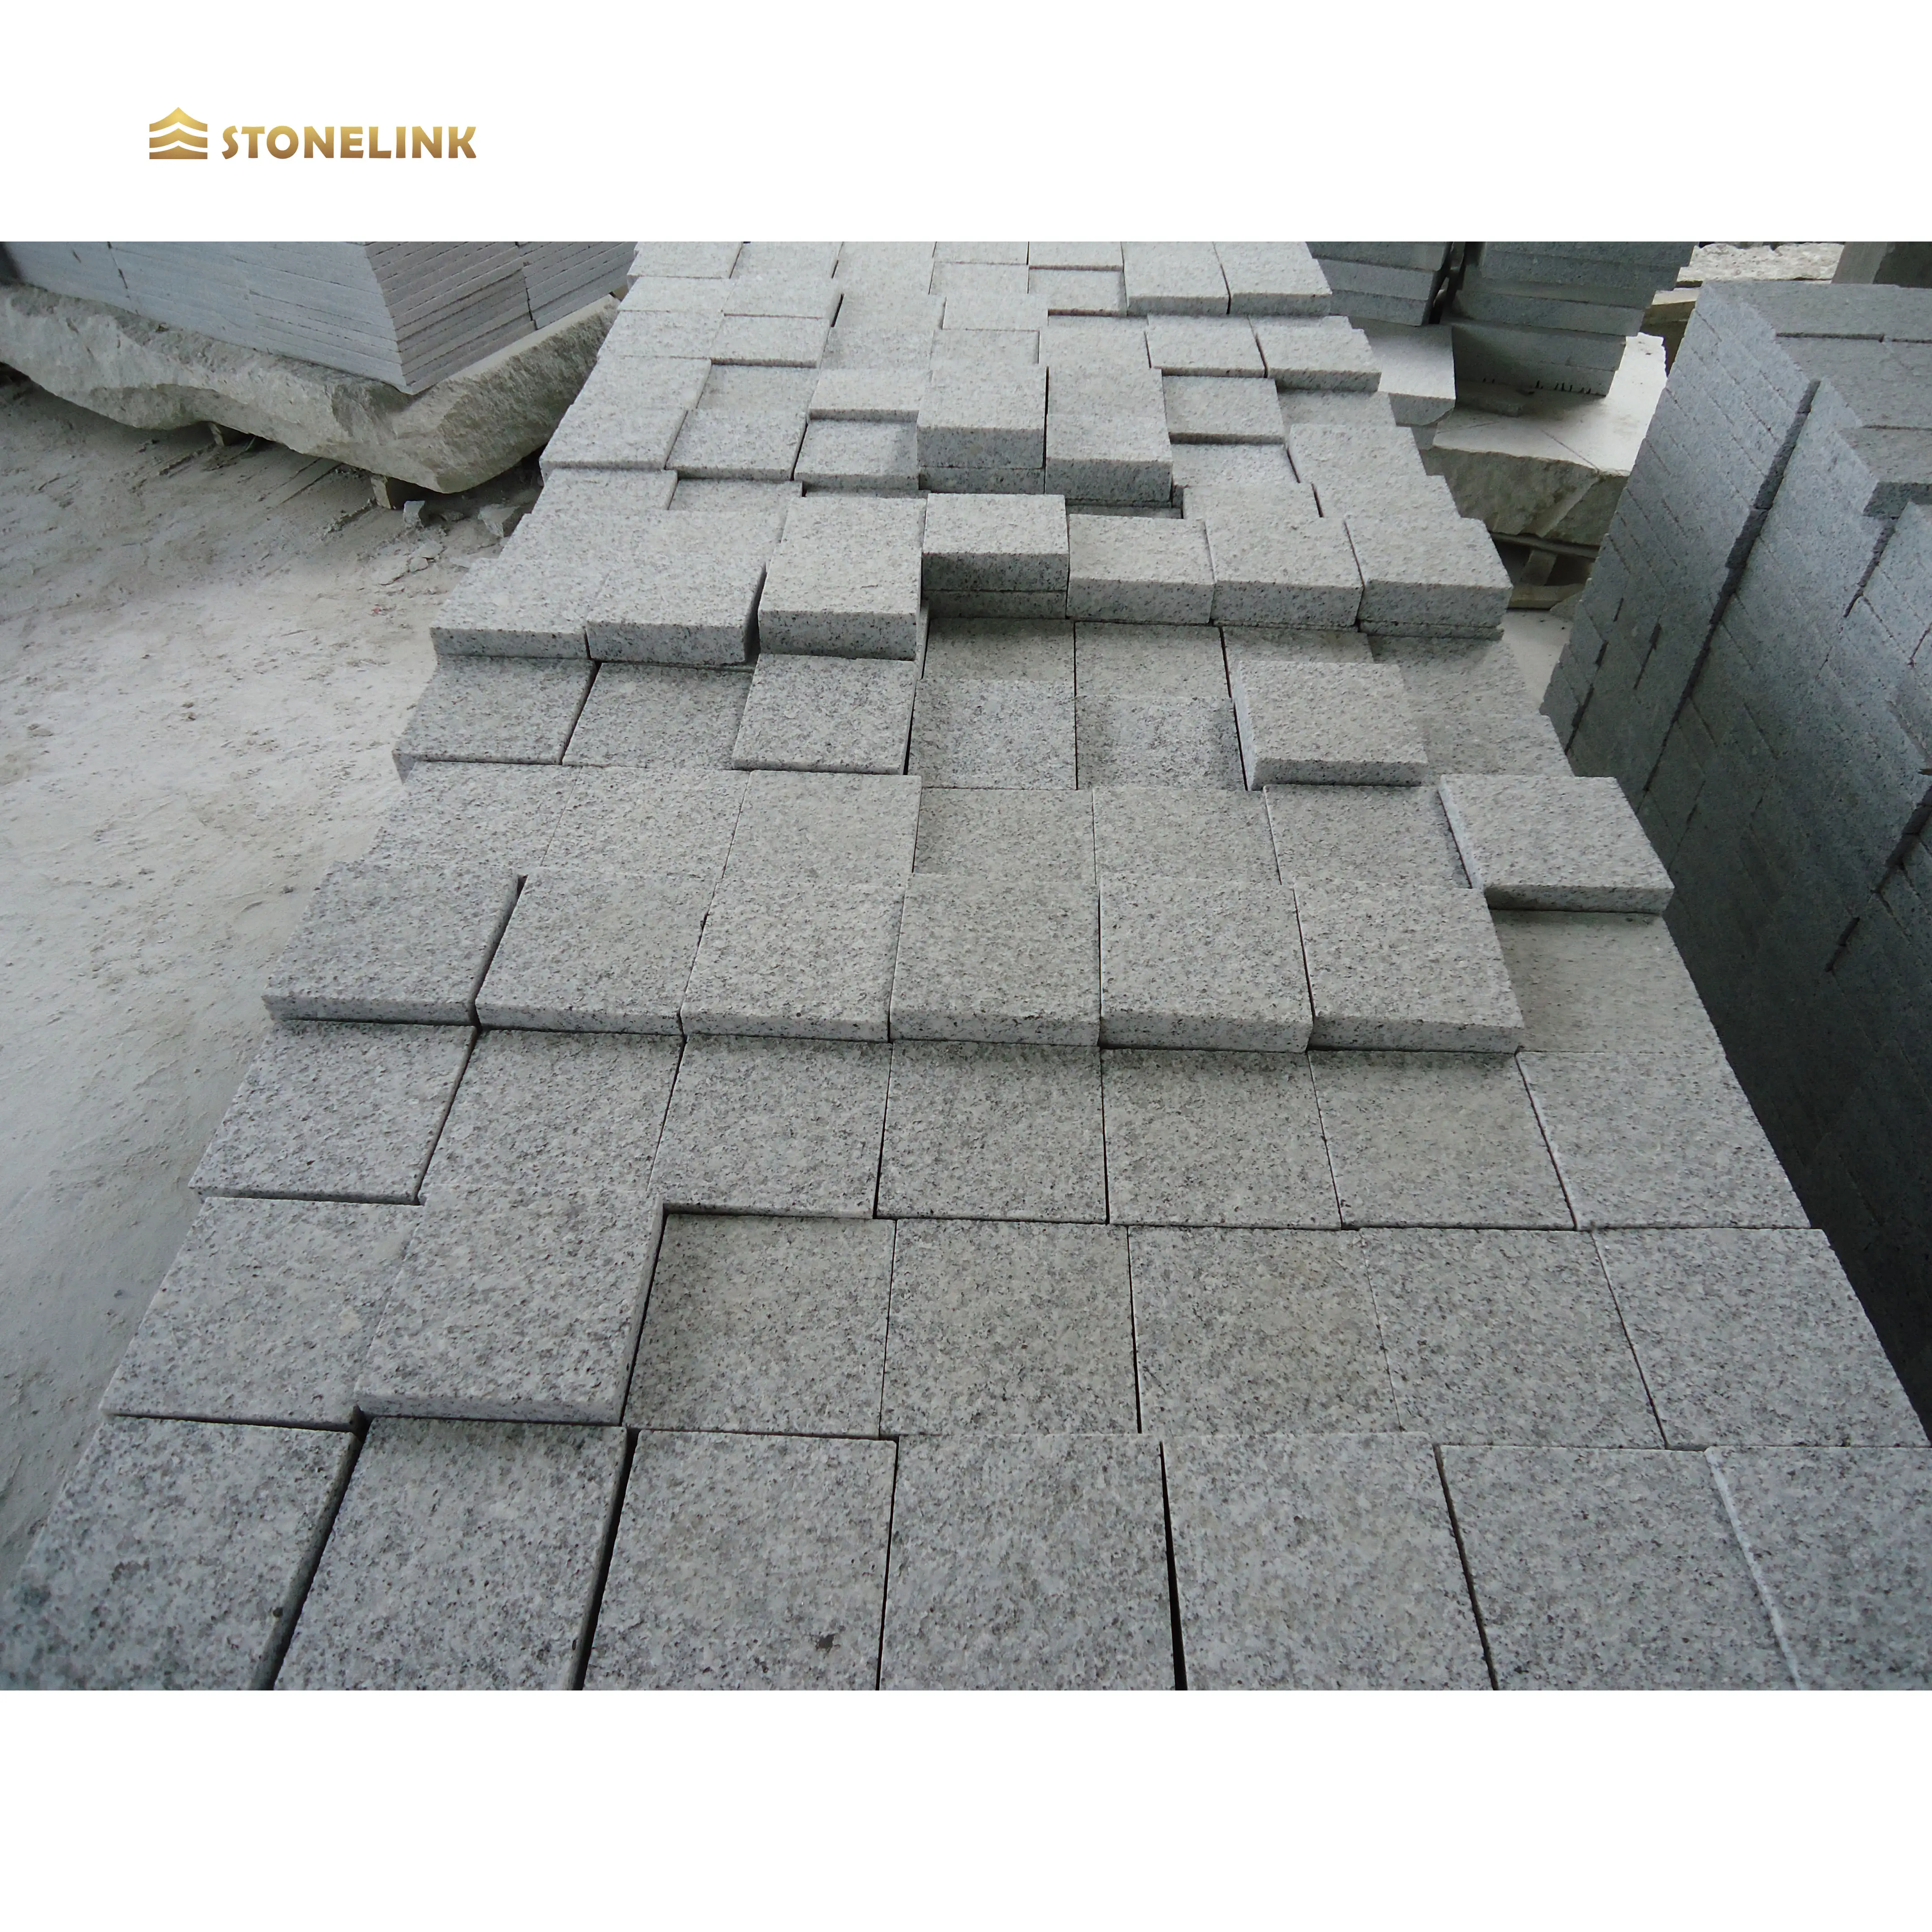 Stonelink China Cheap Grey Flamed Natural Paving Stone Interlock Landscape Cut To Size G603 Granite Pavers Stone For Driveway